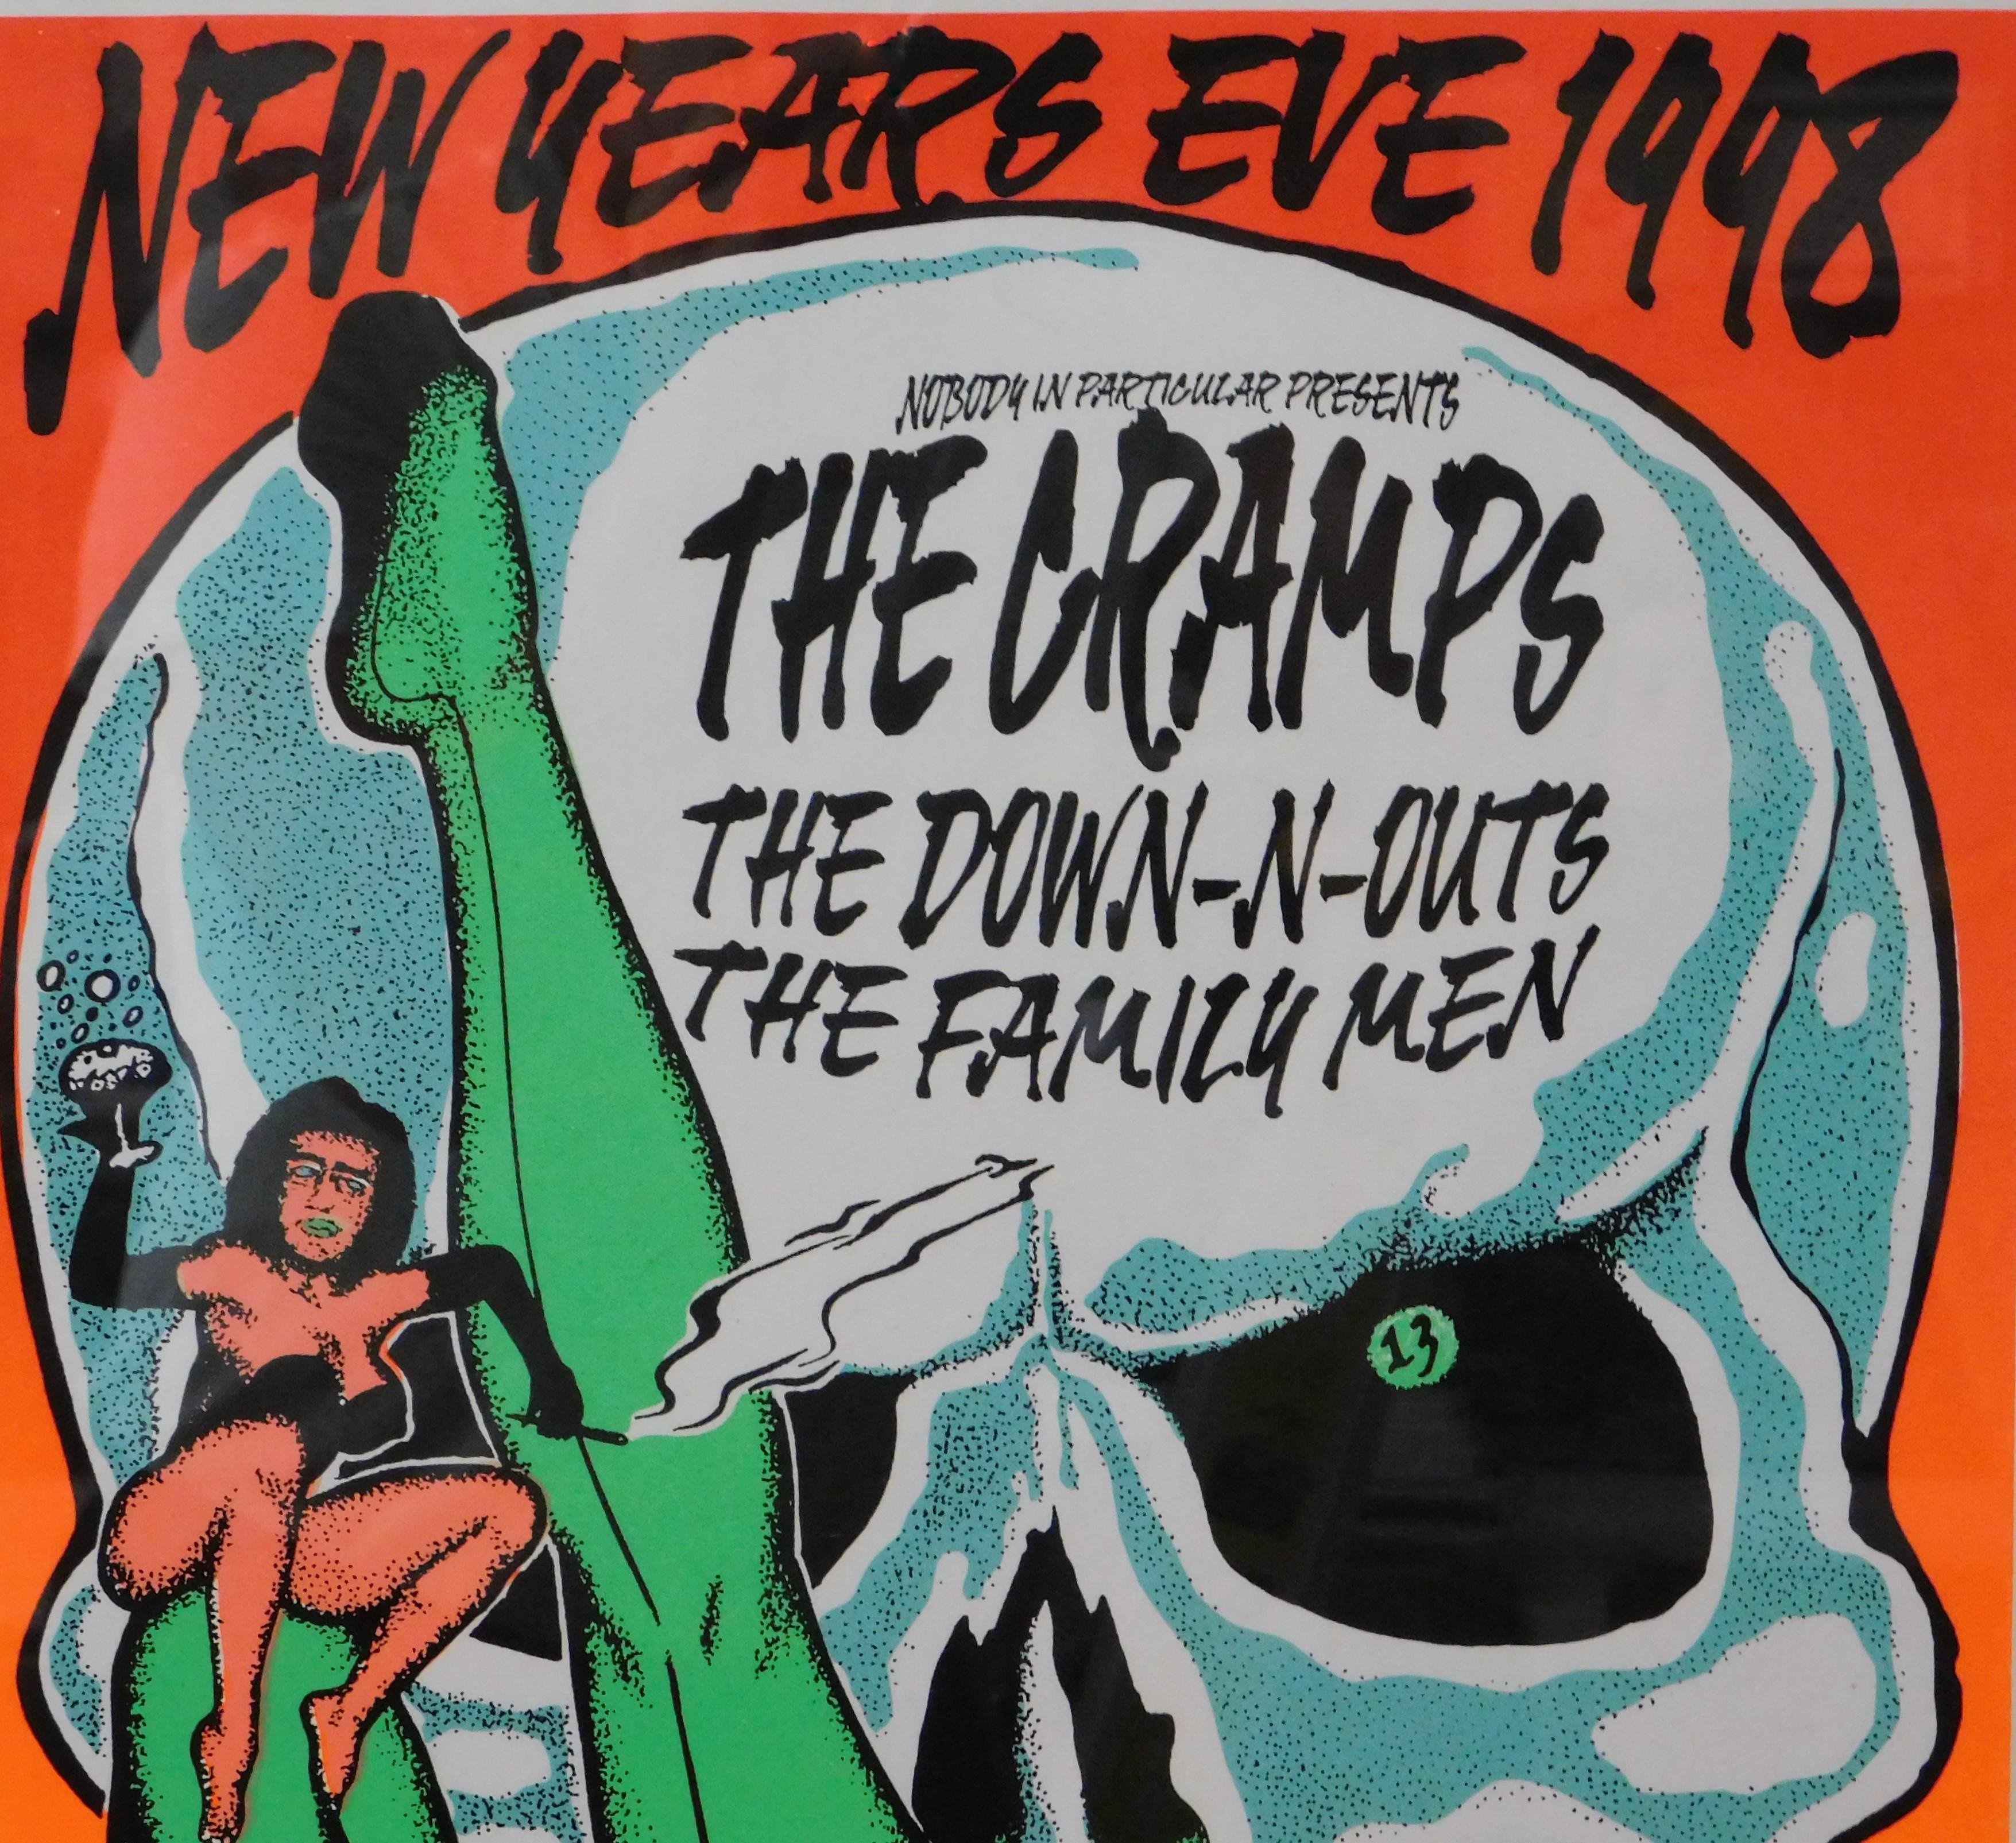 American The Cramps Live New Years Eve 1998 Music Poster